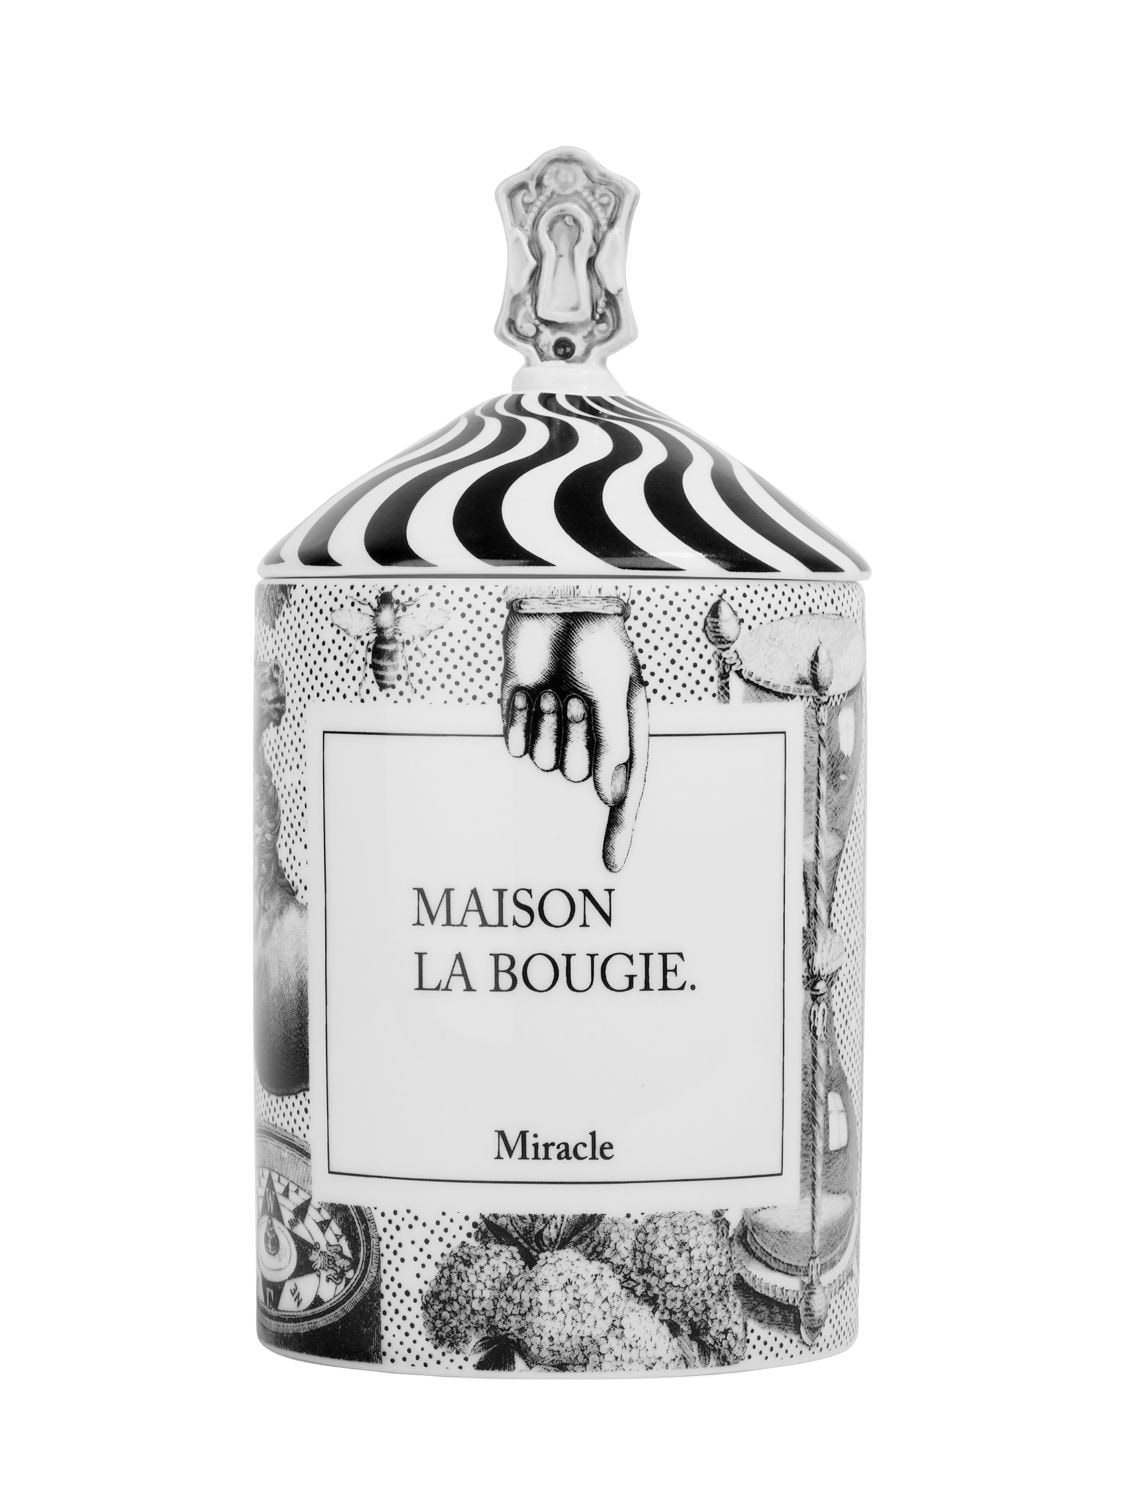 Maison La Bougie 350gr Miracle Candle In Black,white